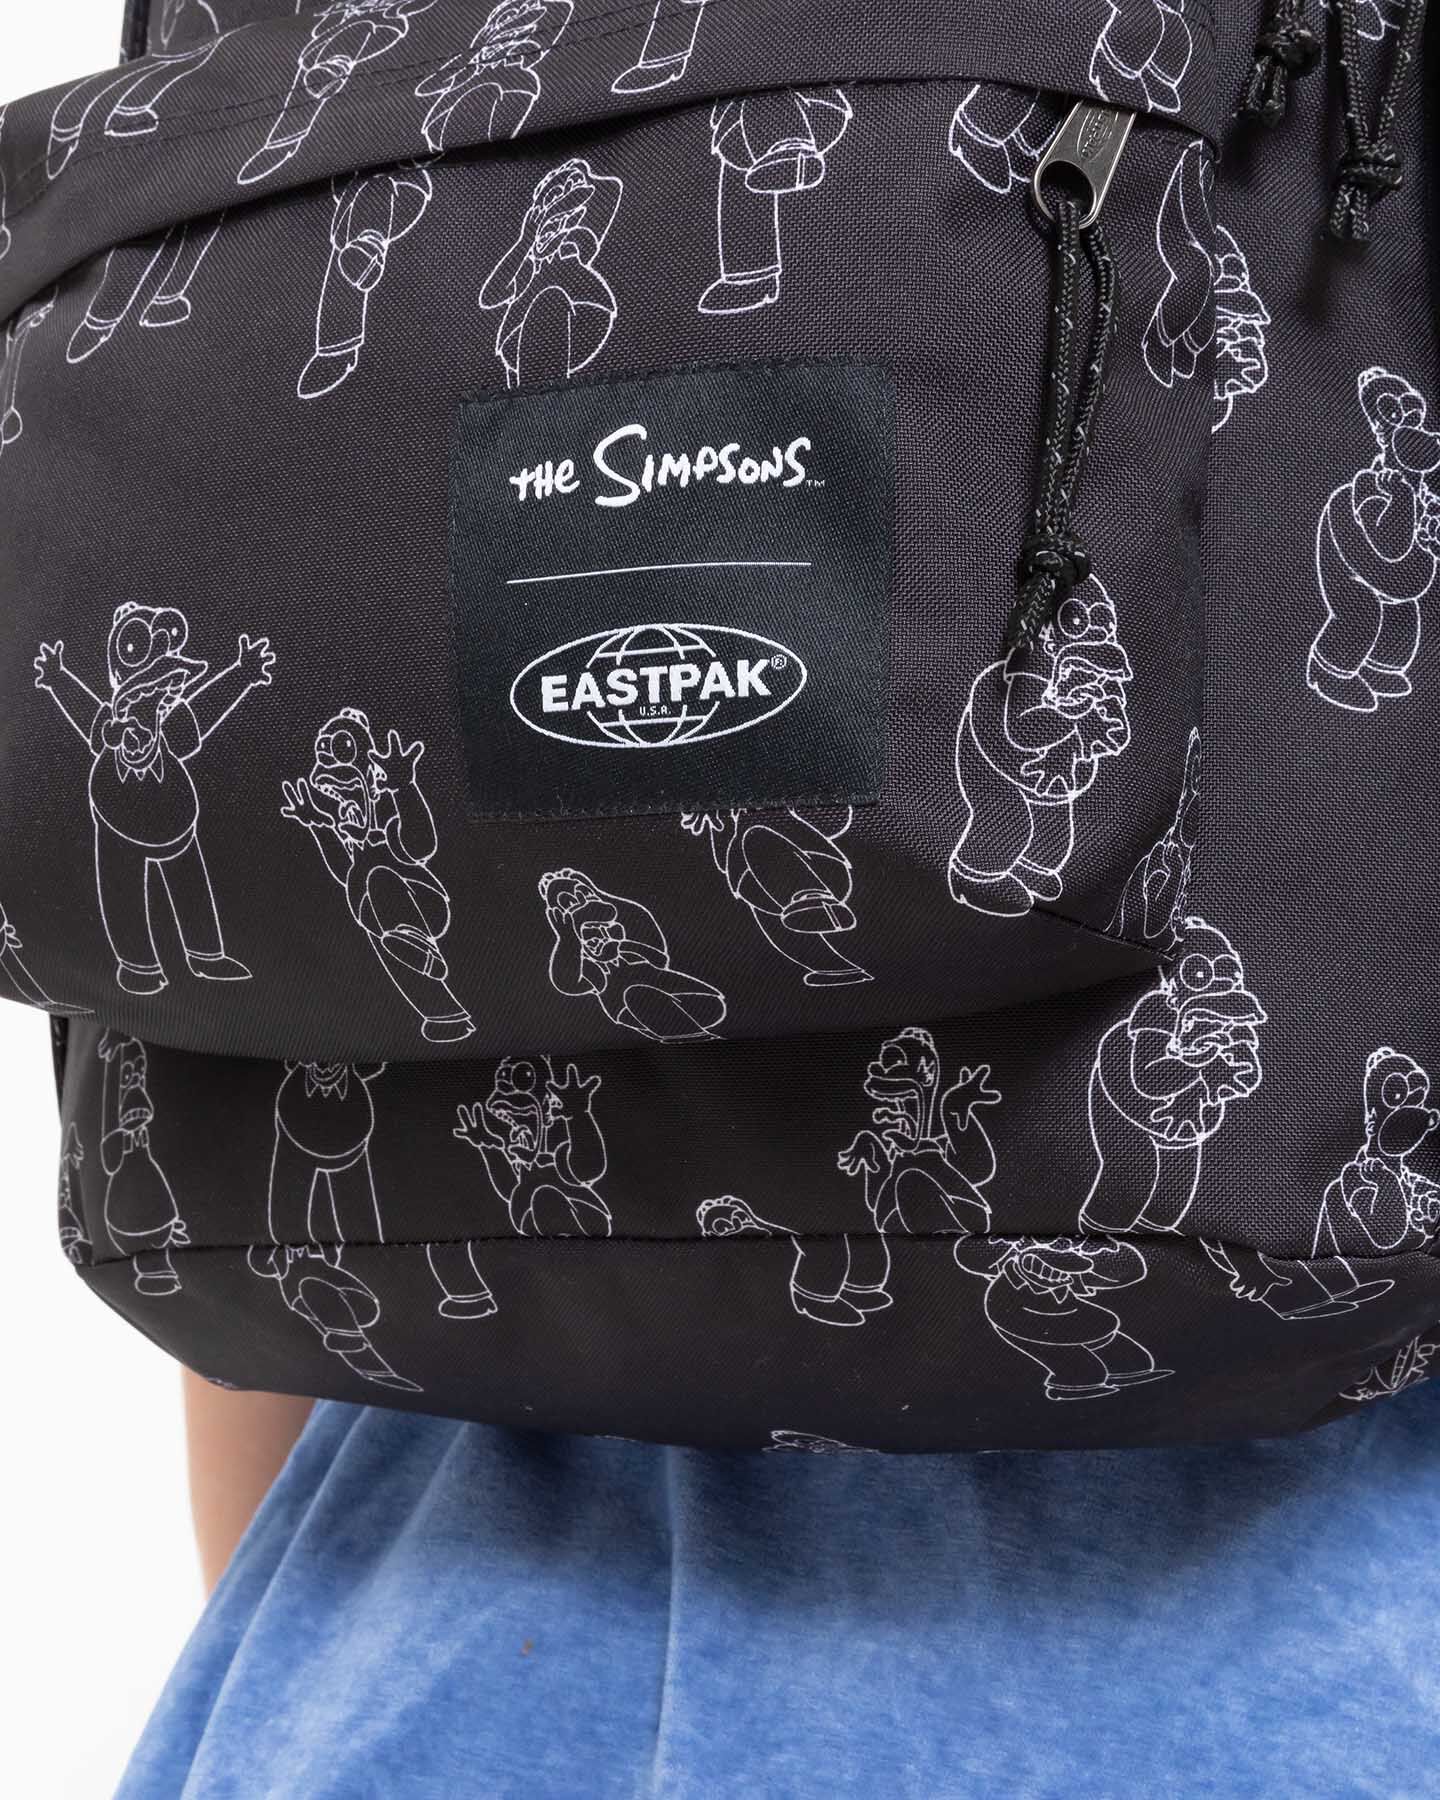  Zaino EASTPAK OUT OF OFFICE THE SIMPSONS  S5550619|7A1|OS scatto 5